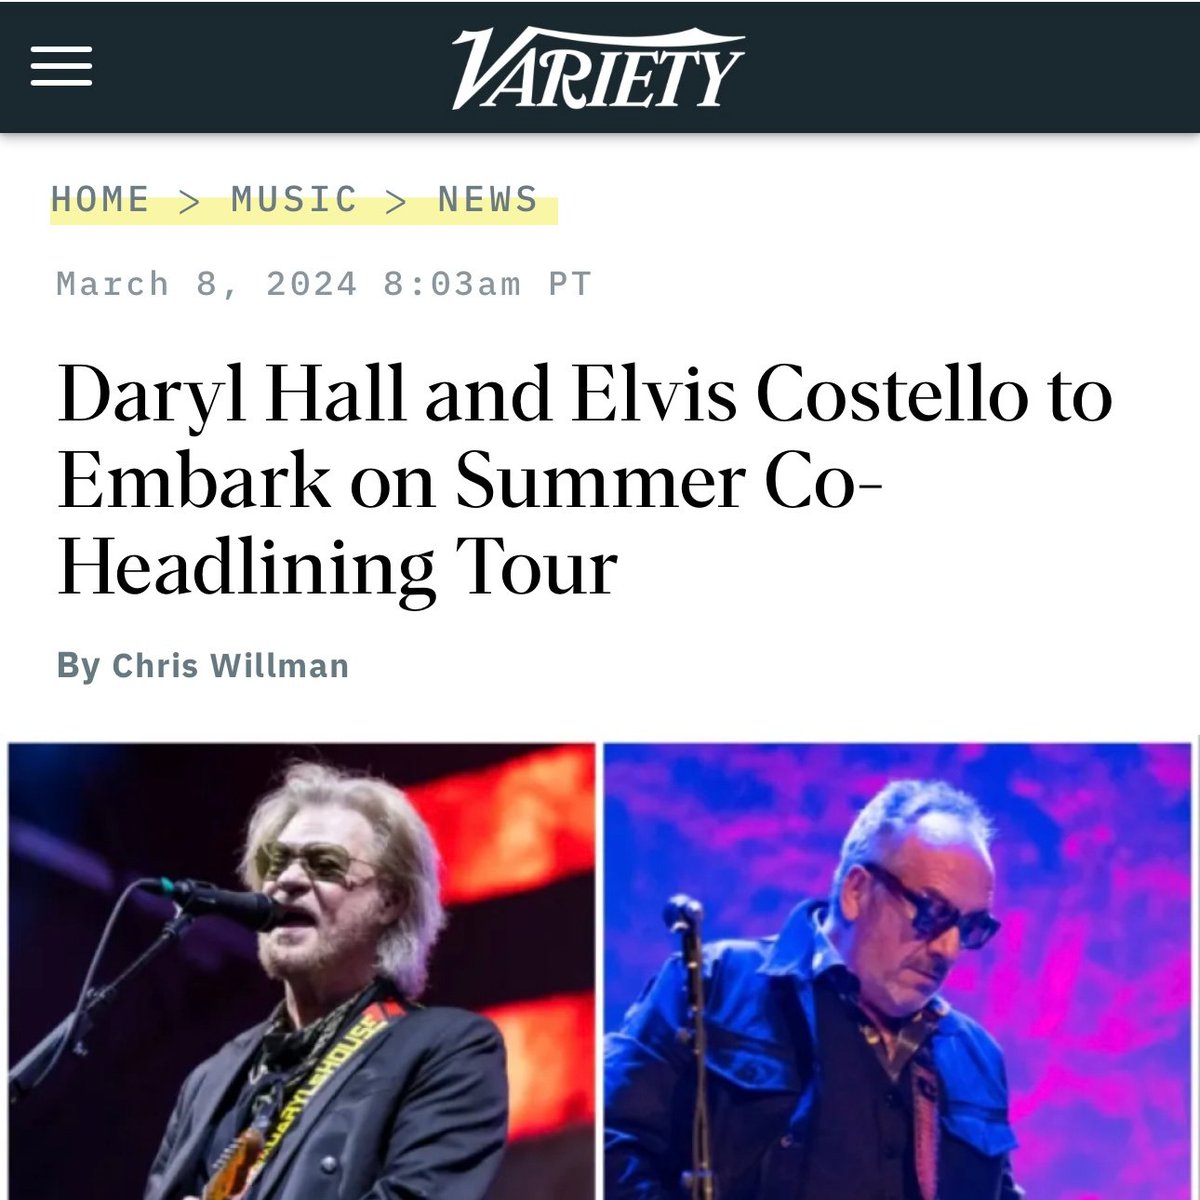 Daryl Hall and Elvis Costello to Embark on Summer Co-Headlining Tour (by @ChrisWillman ) via @Variety